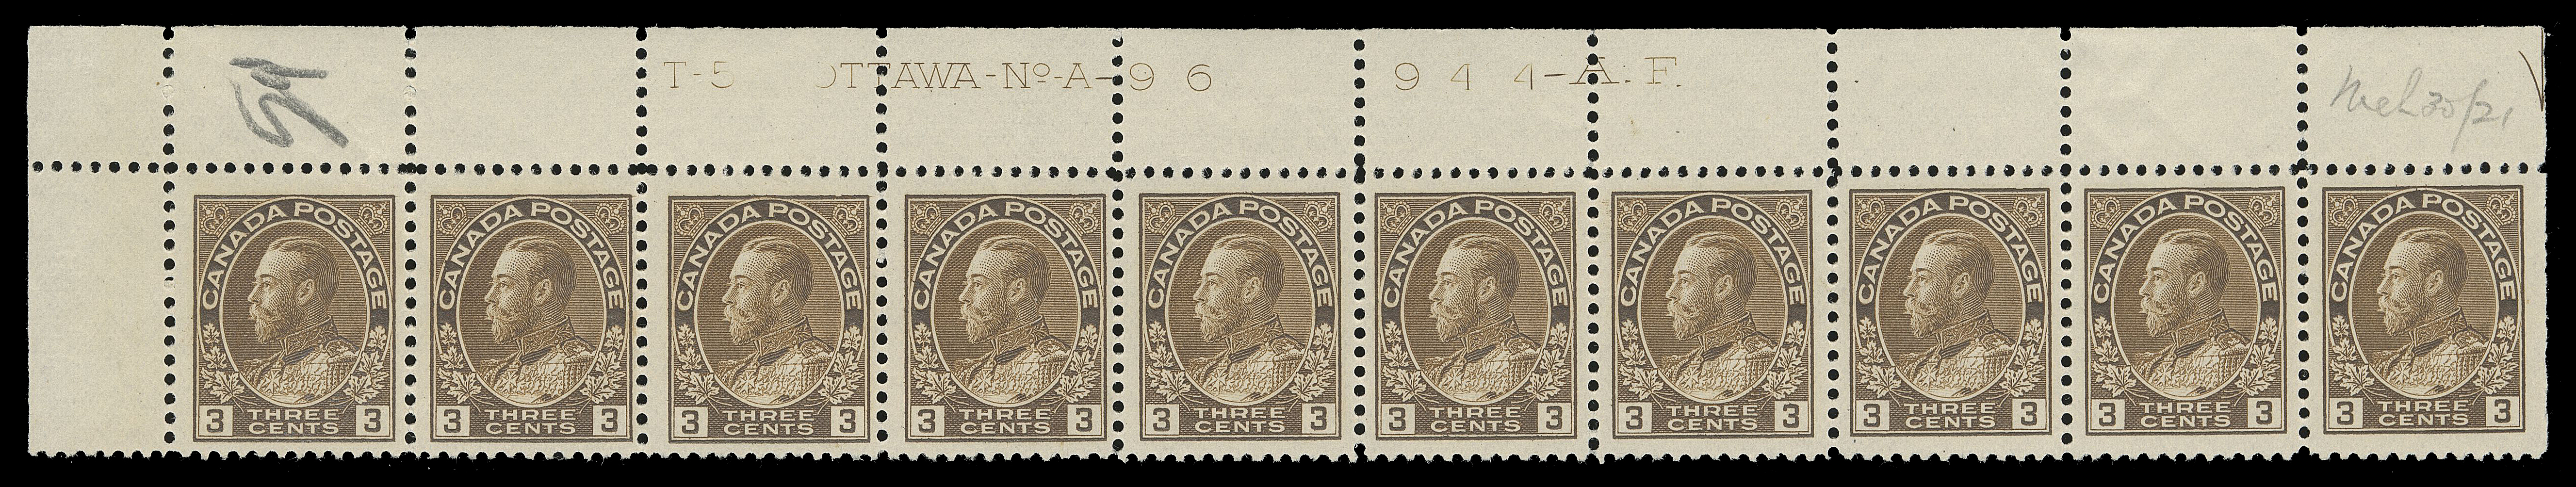 ADMIRAL STAMPS  108, 108ii,A very attractive trio of strips of ten with consecutive plate numbers, in distinctive shades - UL Plates 96 and UL 97 in brown and UR Plate 98 in dark brown with natural gum skip on straight edged stamp. All quite well centered, LH in margins, all stamps NH, VF; first two with penciled "Mch 30 / 21" and third "May 13 / 21" dates of acquisition. (Unitrade cat. $4,800)